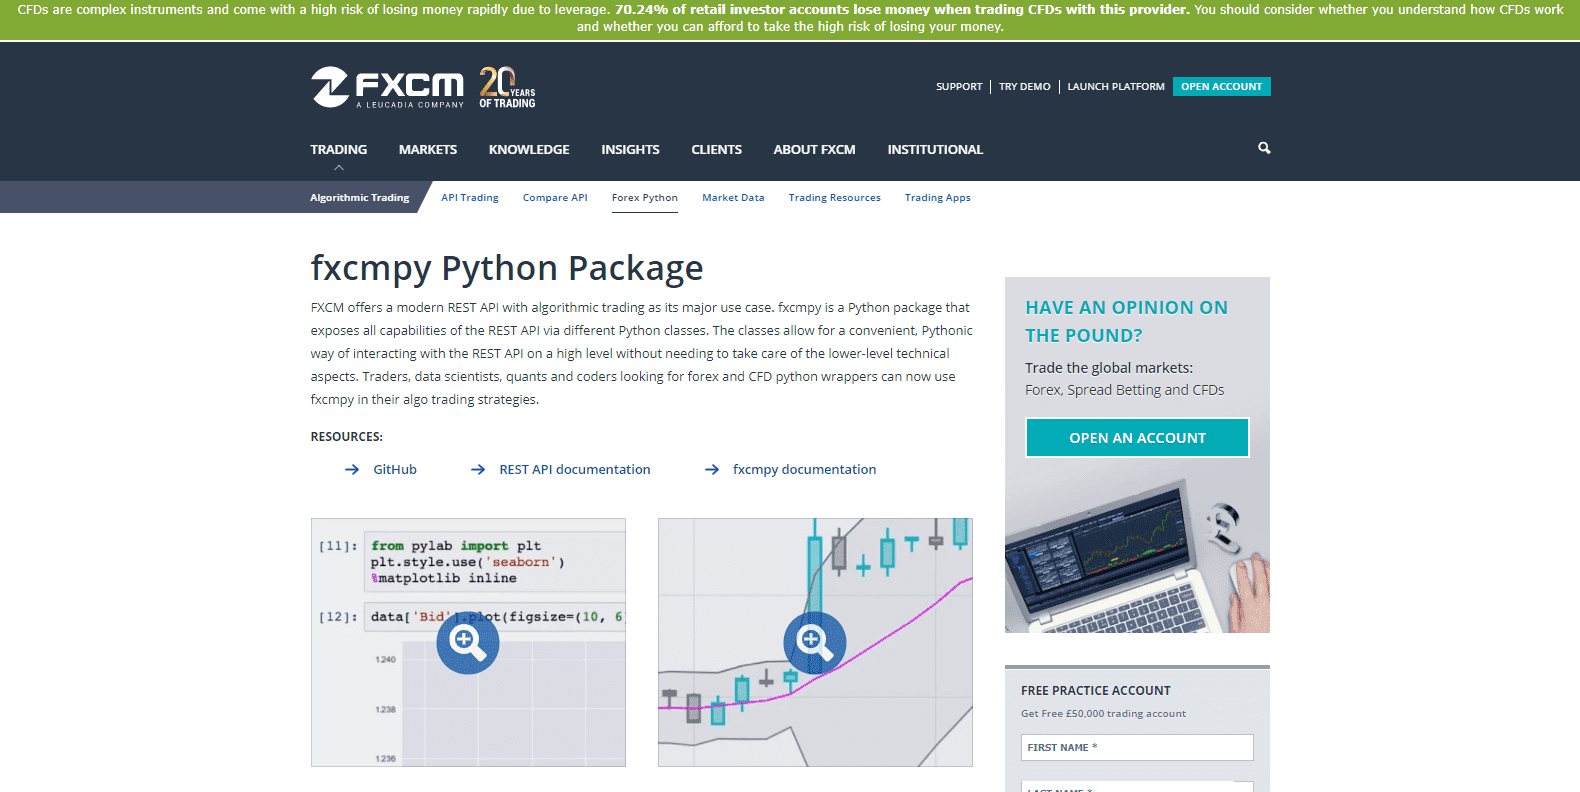 FXCM Python package